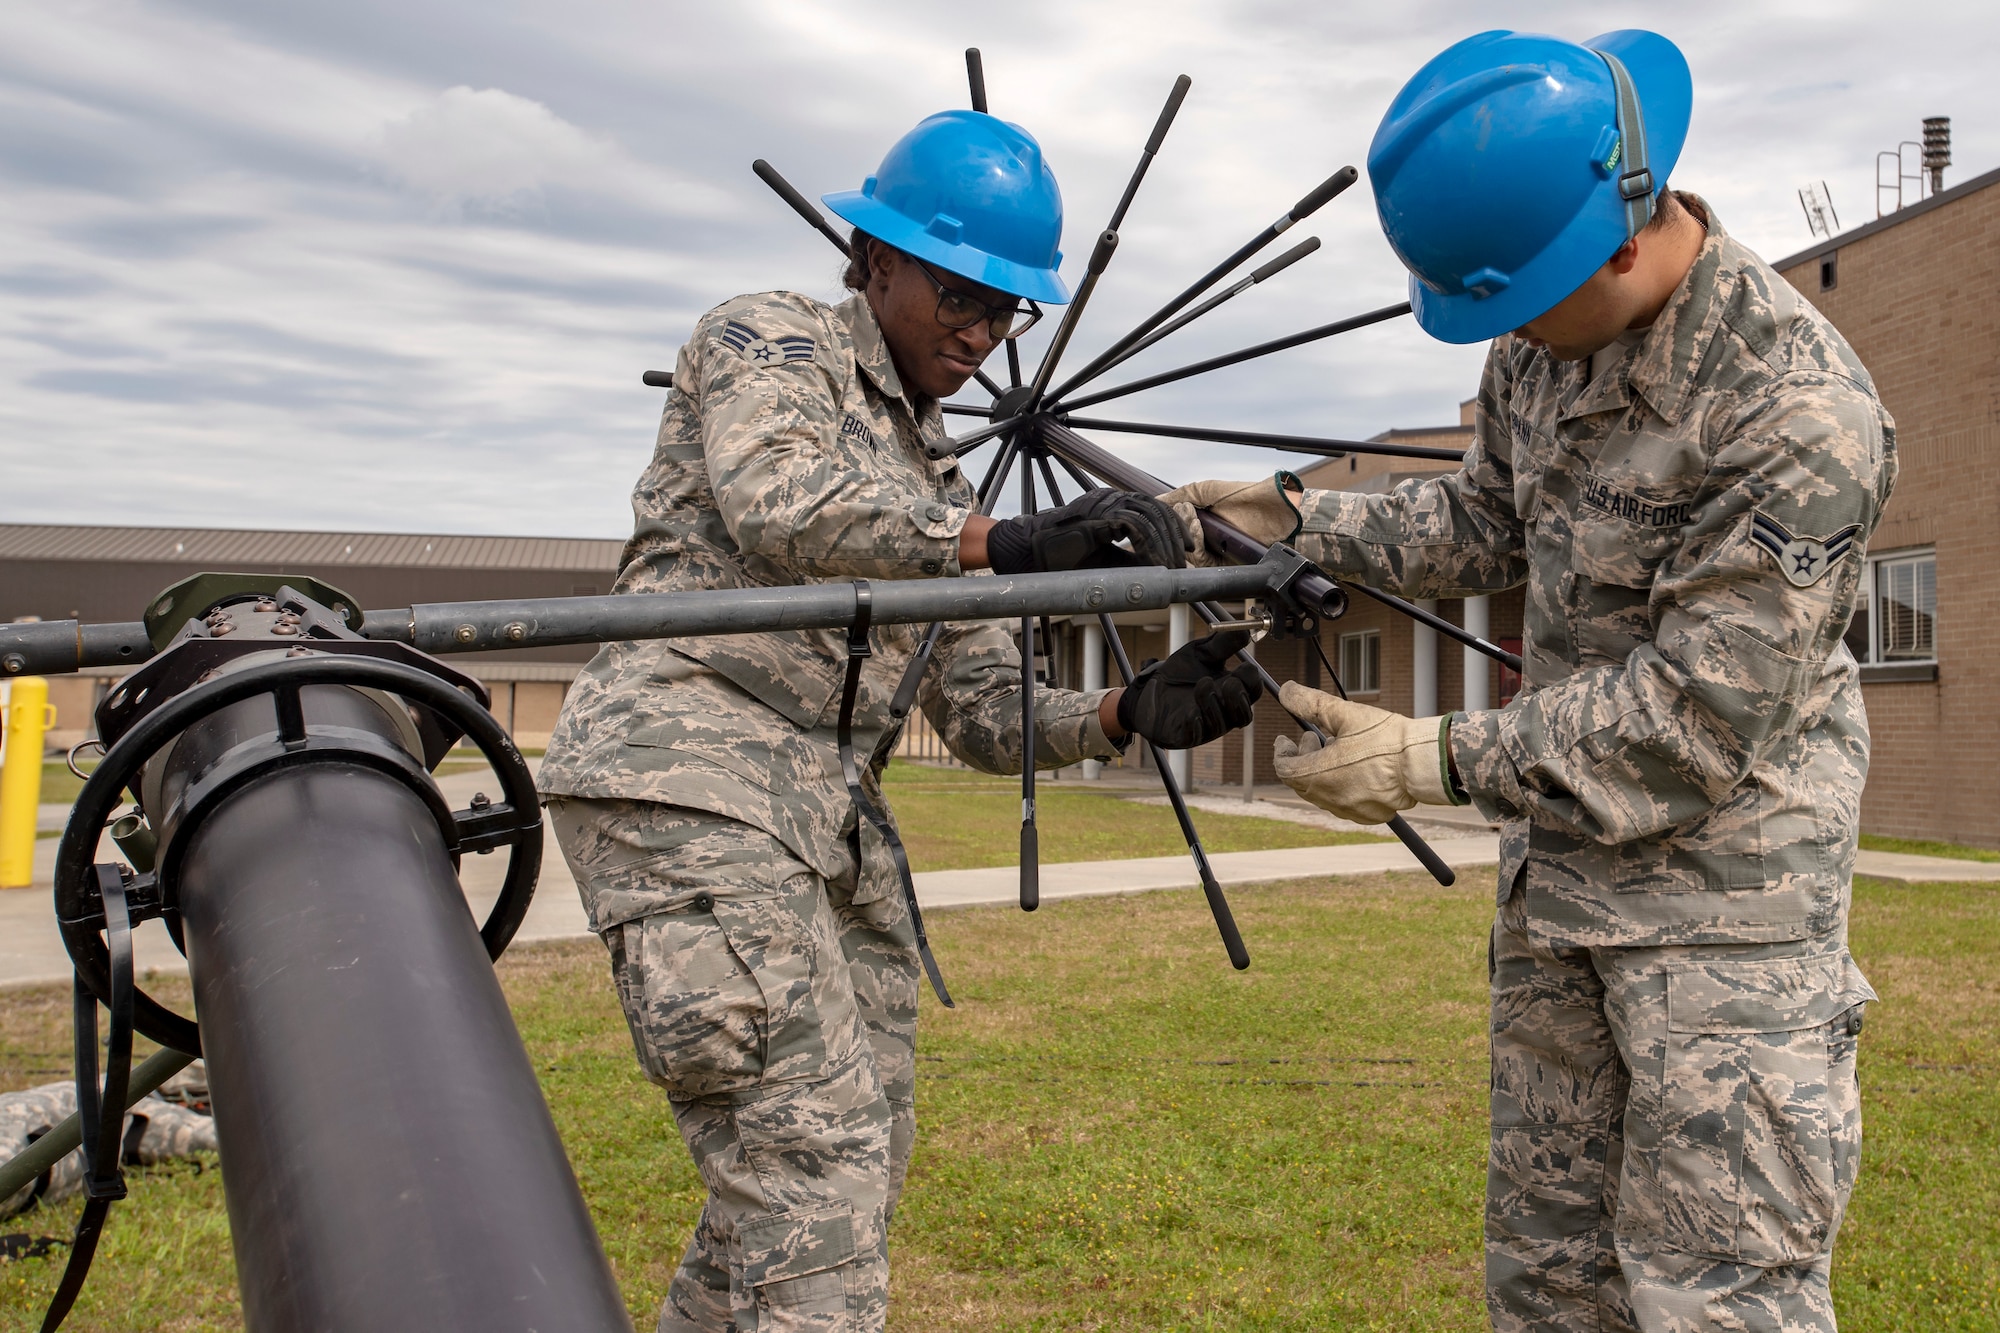 Airmen set up a Joint Incident Site Communication Capability system